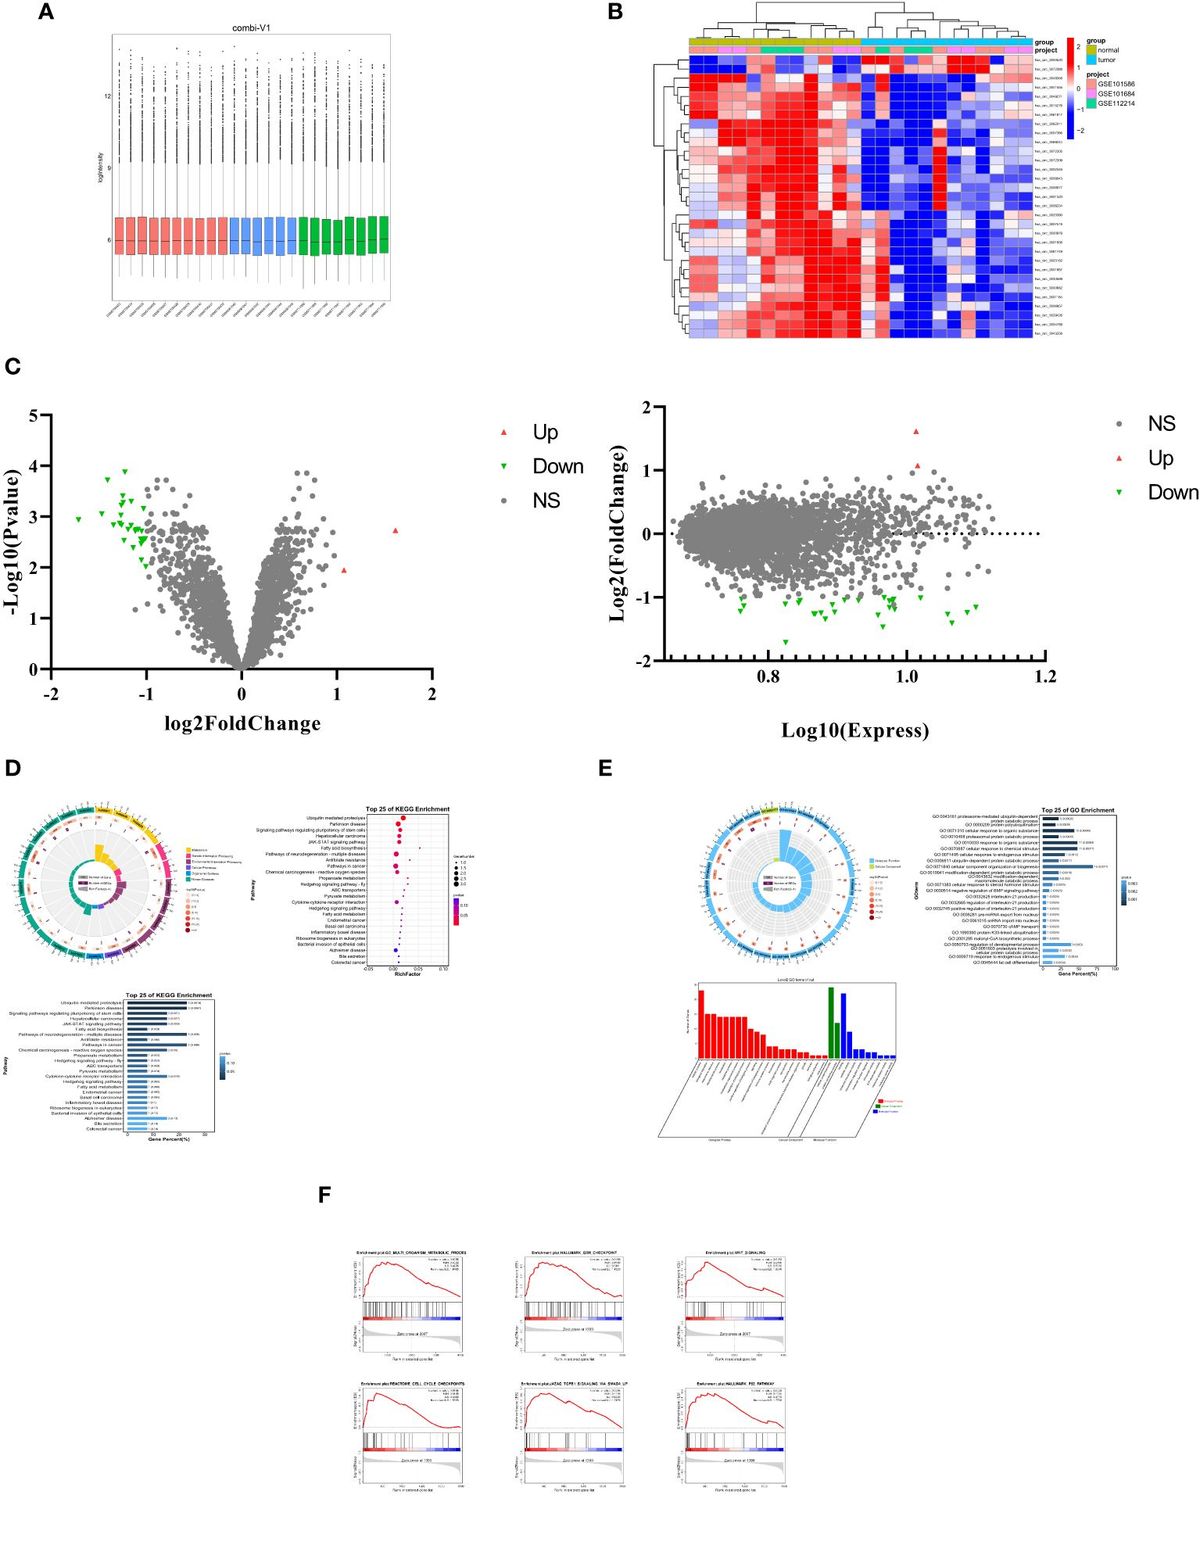 Circ_BBS9 as an early diagnostic biomarker for lung adenocarcinoma: direct interaction with IFIT3 in the modulation of tumor immune microenvironment